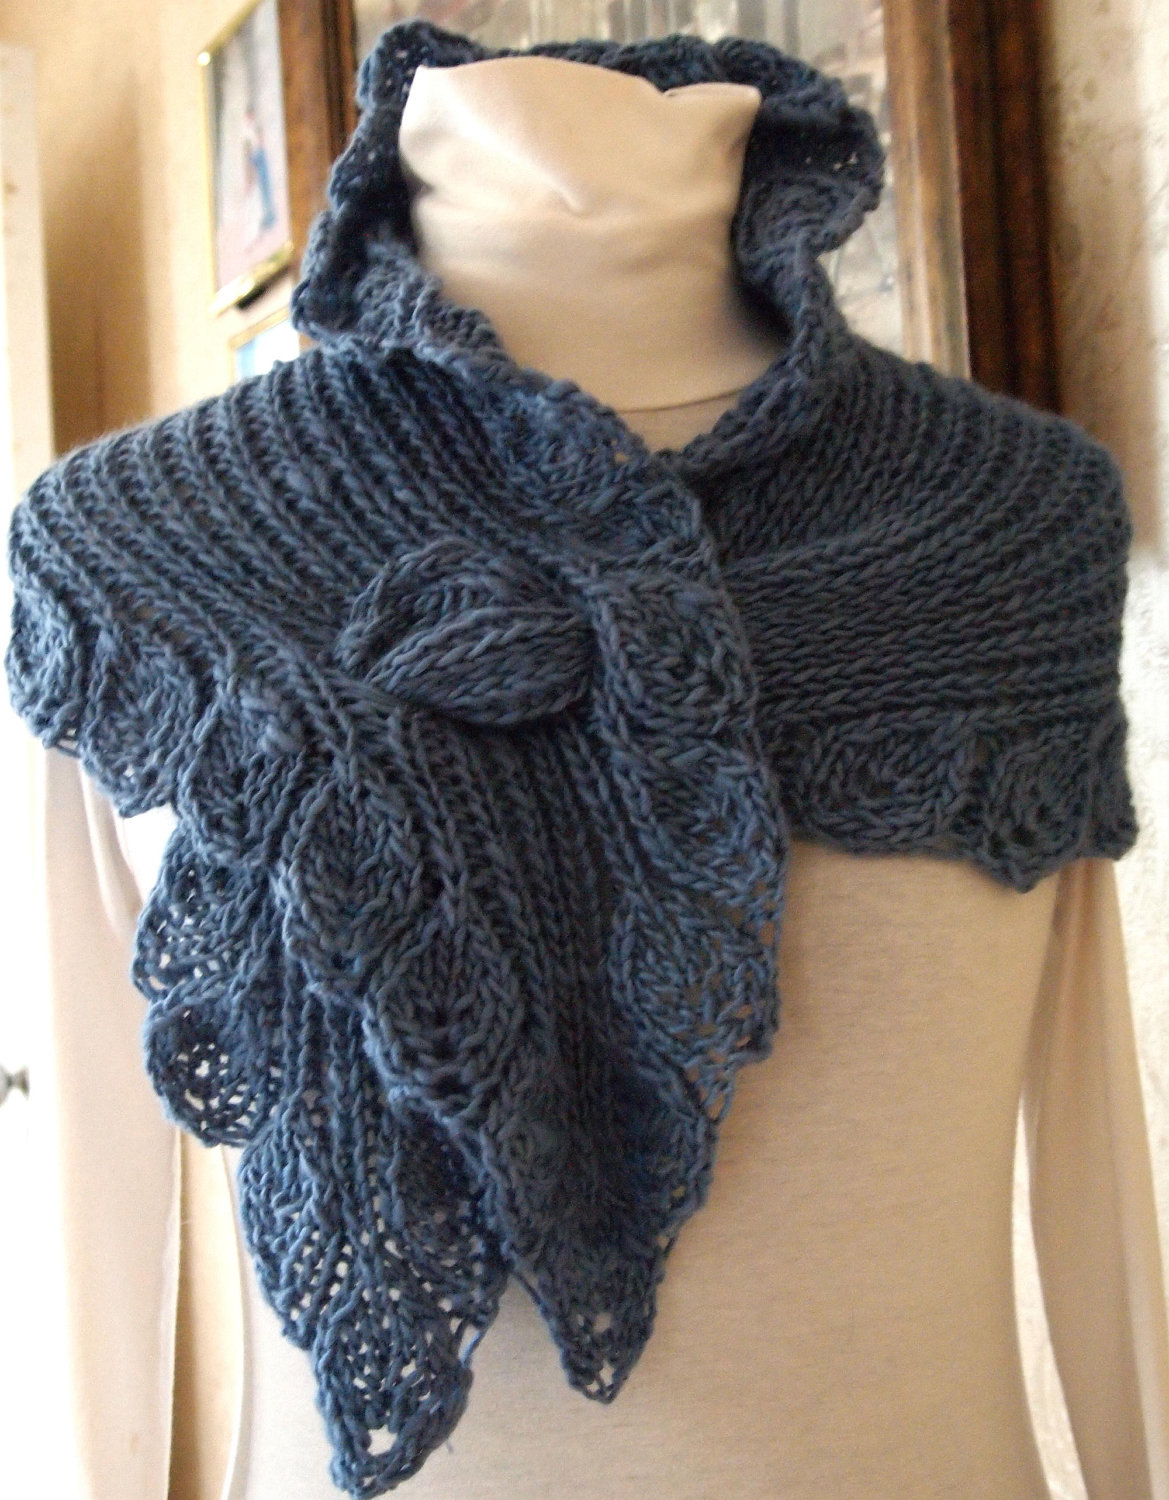 Knitting Pattern for Self-Fastening Leaf Lace Wrap